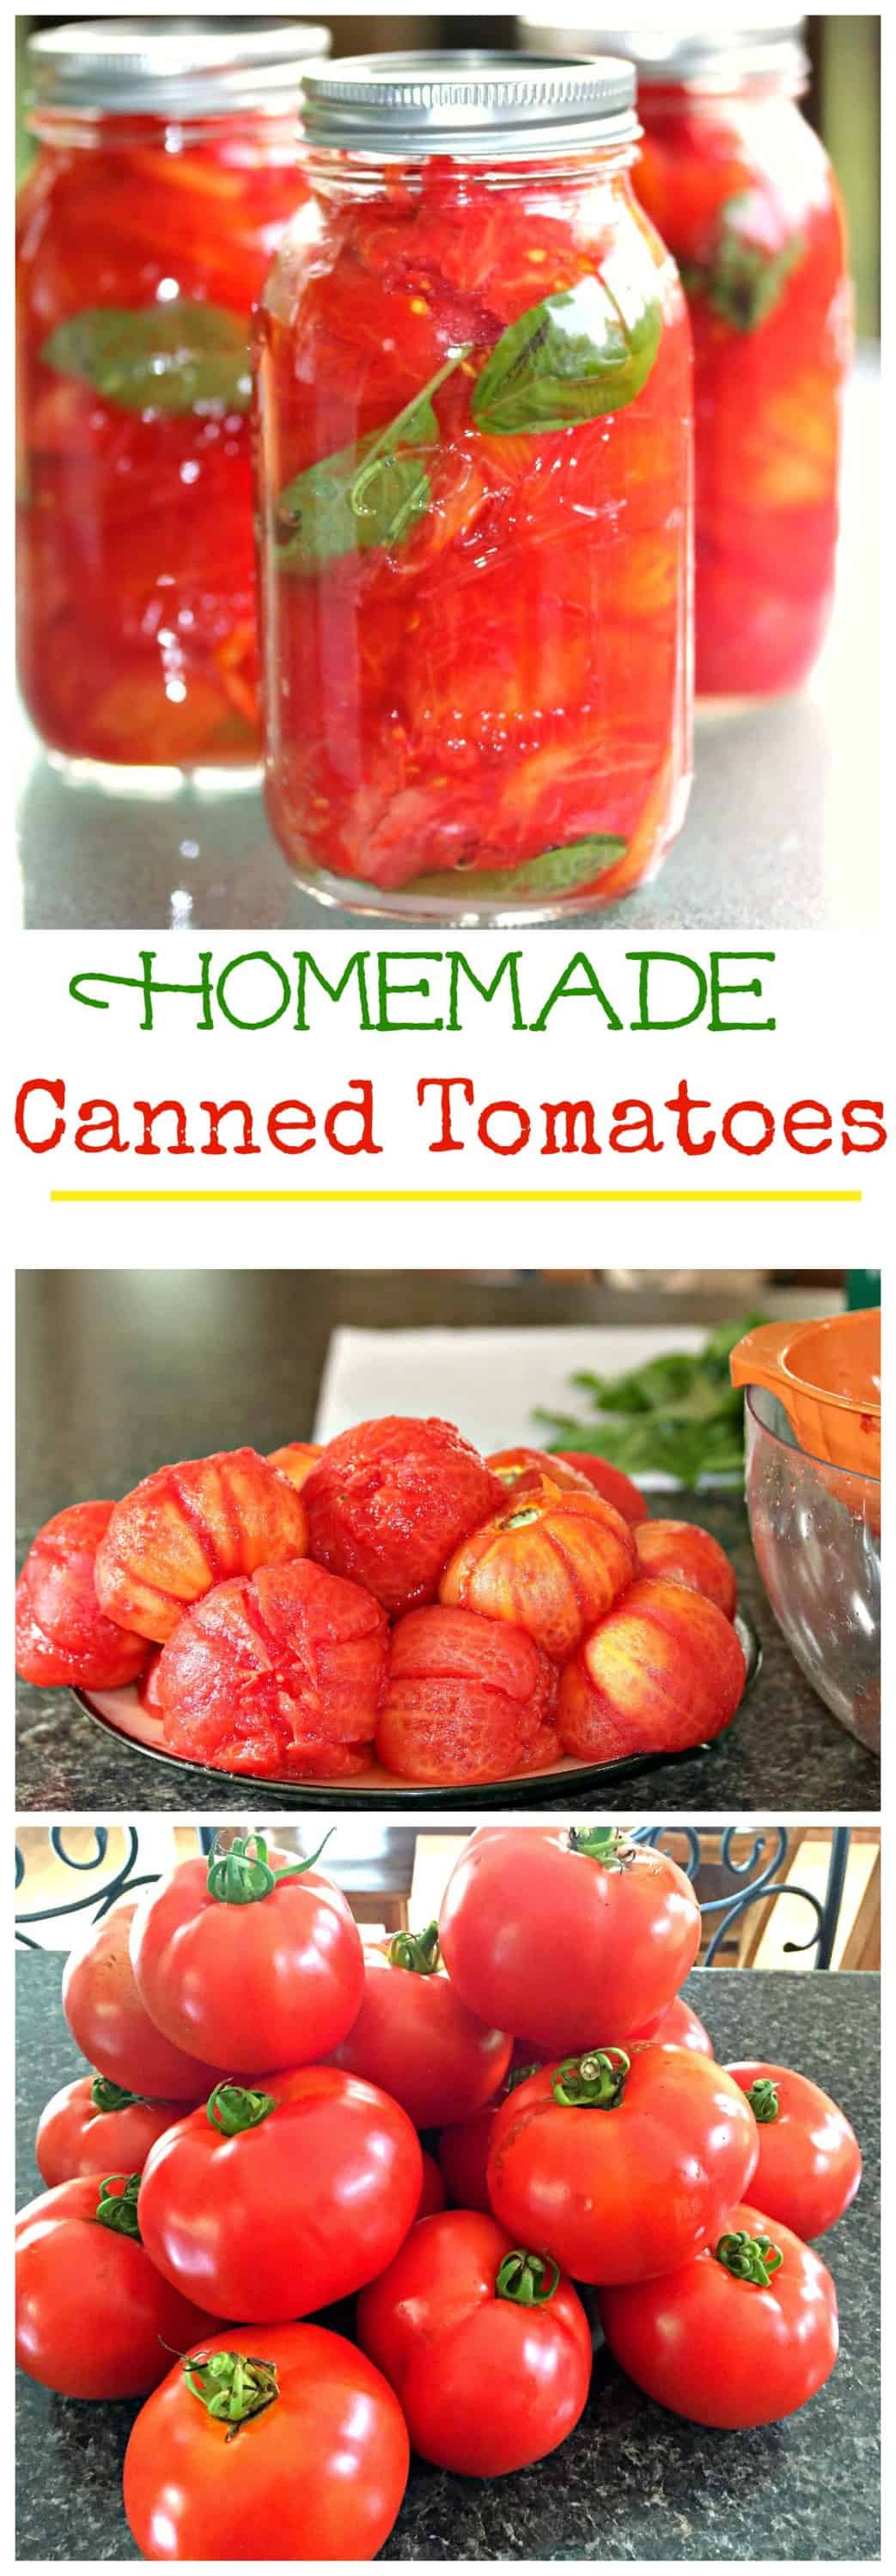 These homemade canned tomatoes are the best way to keep your garden tomatoes fresh and ready to eat and cook with all year long! #cannedtomatoes #tomatoes #gardening #vegetables #canning #healthy #fresh